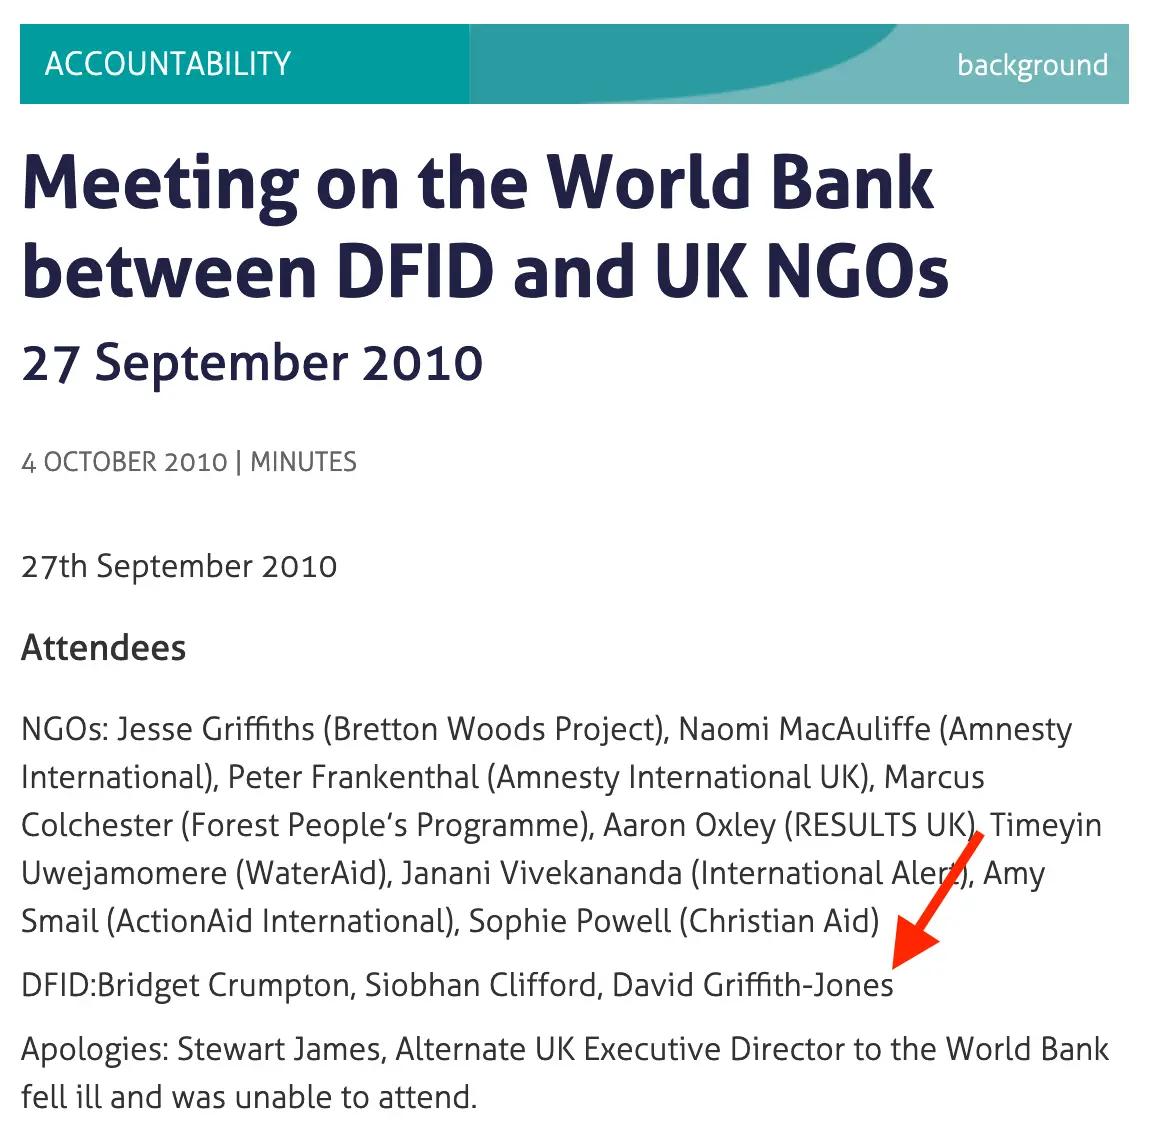 David Griffith-Jones worked for DFID